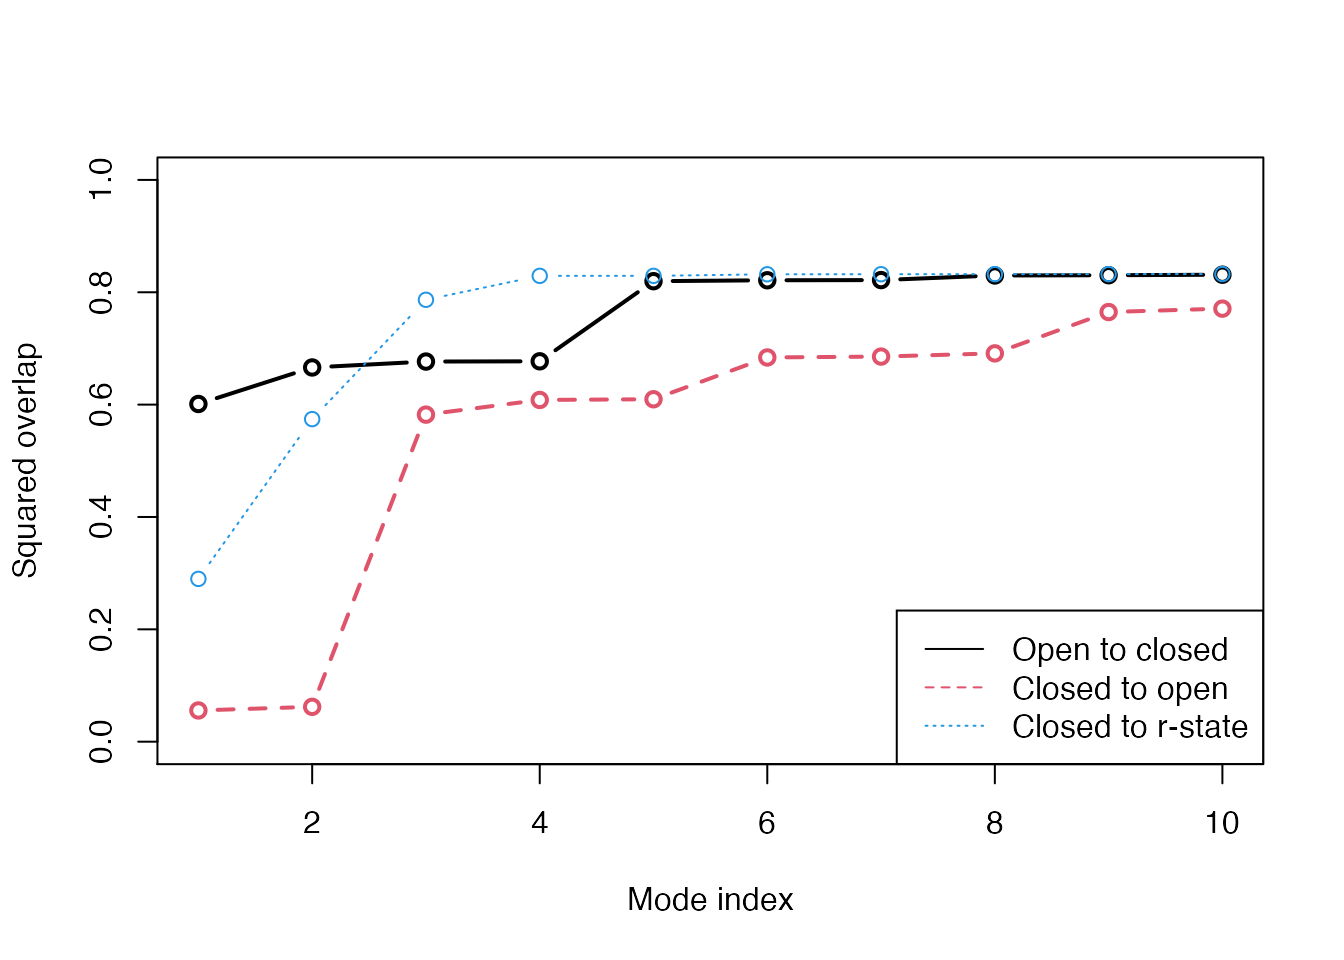 Overlap anlaysis with function **overlap()**. The modes calculated on the open state of the GroEL subunit shows a high similarity to the conformational difference vector (black), while the agreement is lower when the normal modes are calculated on the closed state (red). Blue line correspond to the overlap between the closed state and the r-state (a semi-open state characterized by a rotation of the apical domain in the opposite direction as compared to the open state.